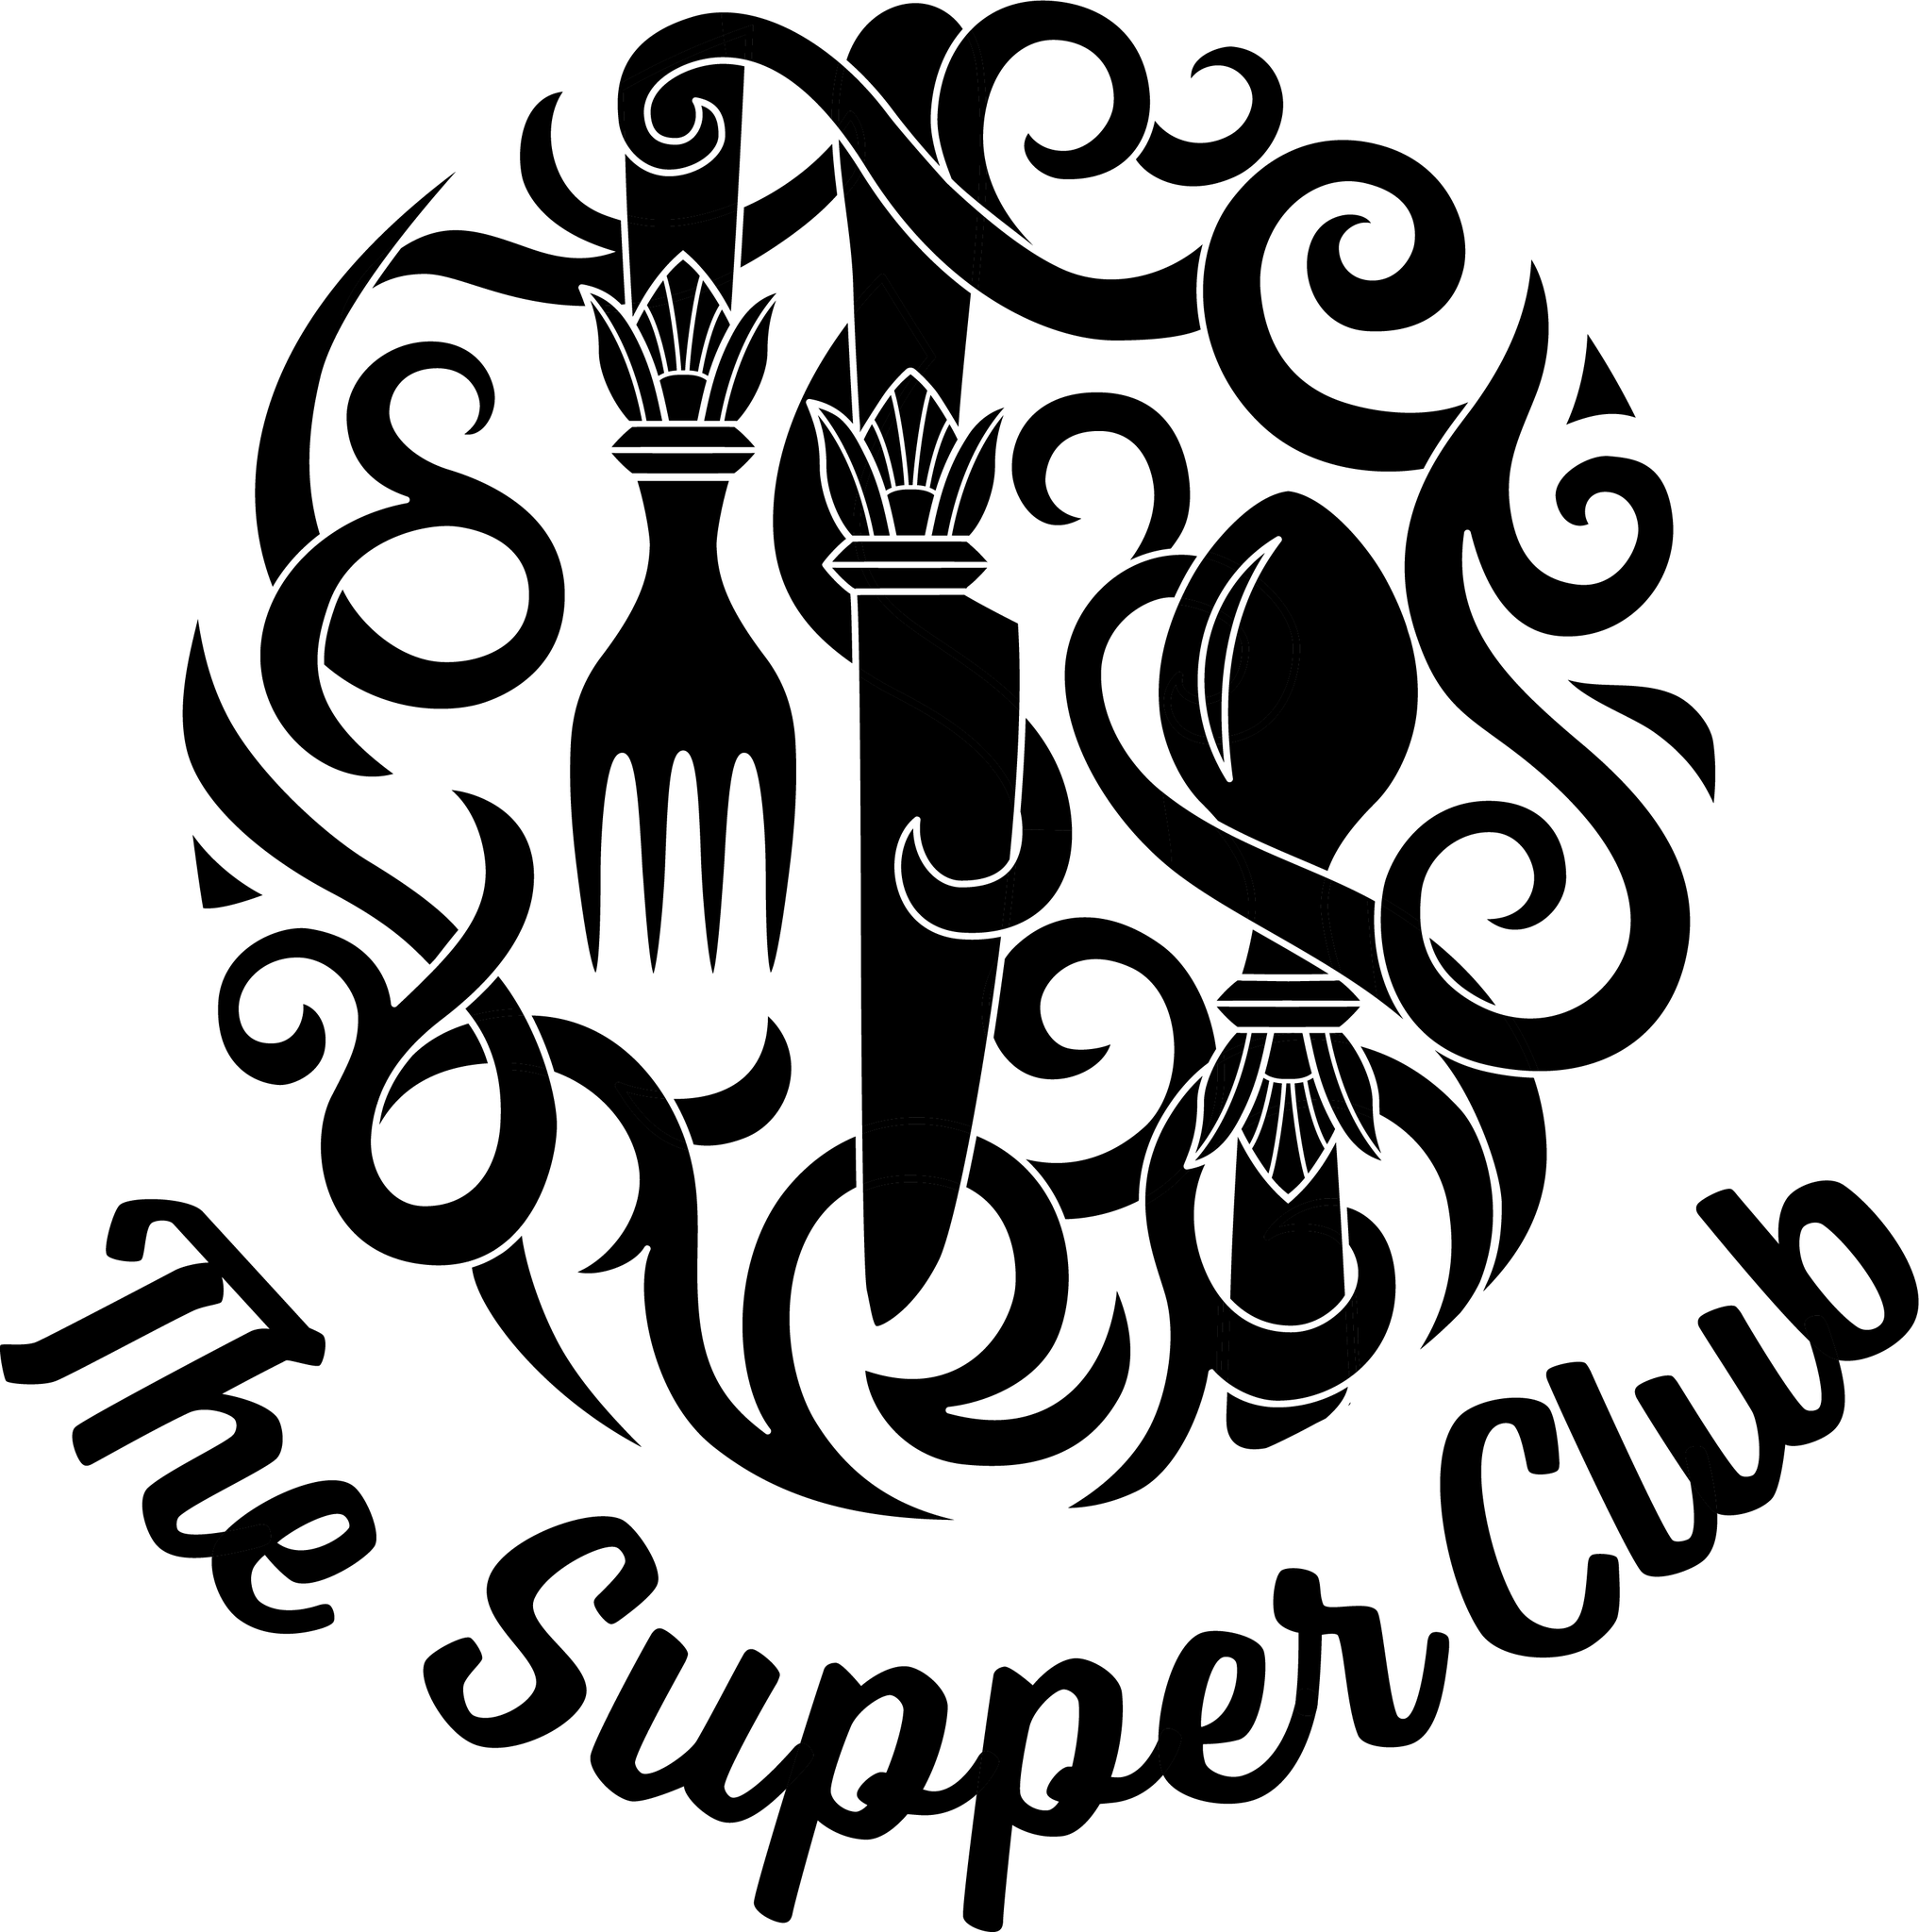 The Supper Club by Navasota Theatre Alliance